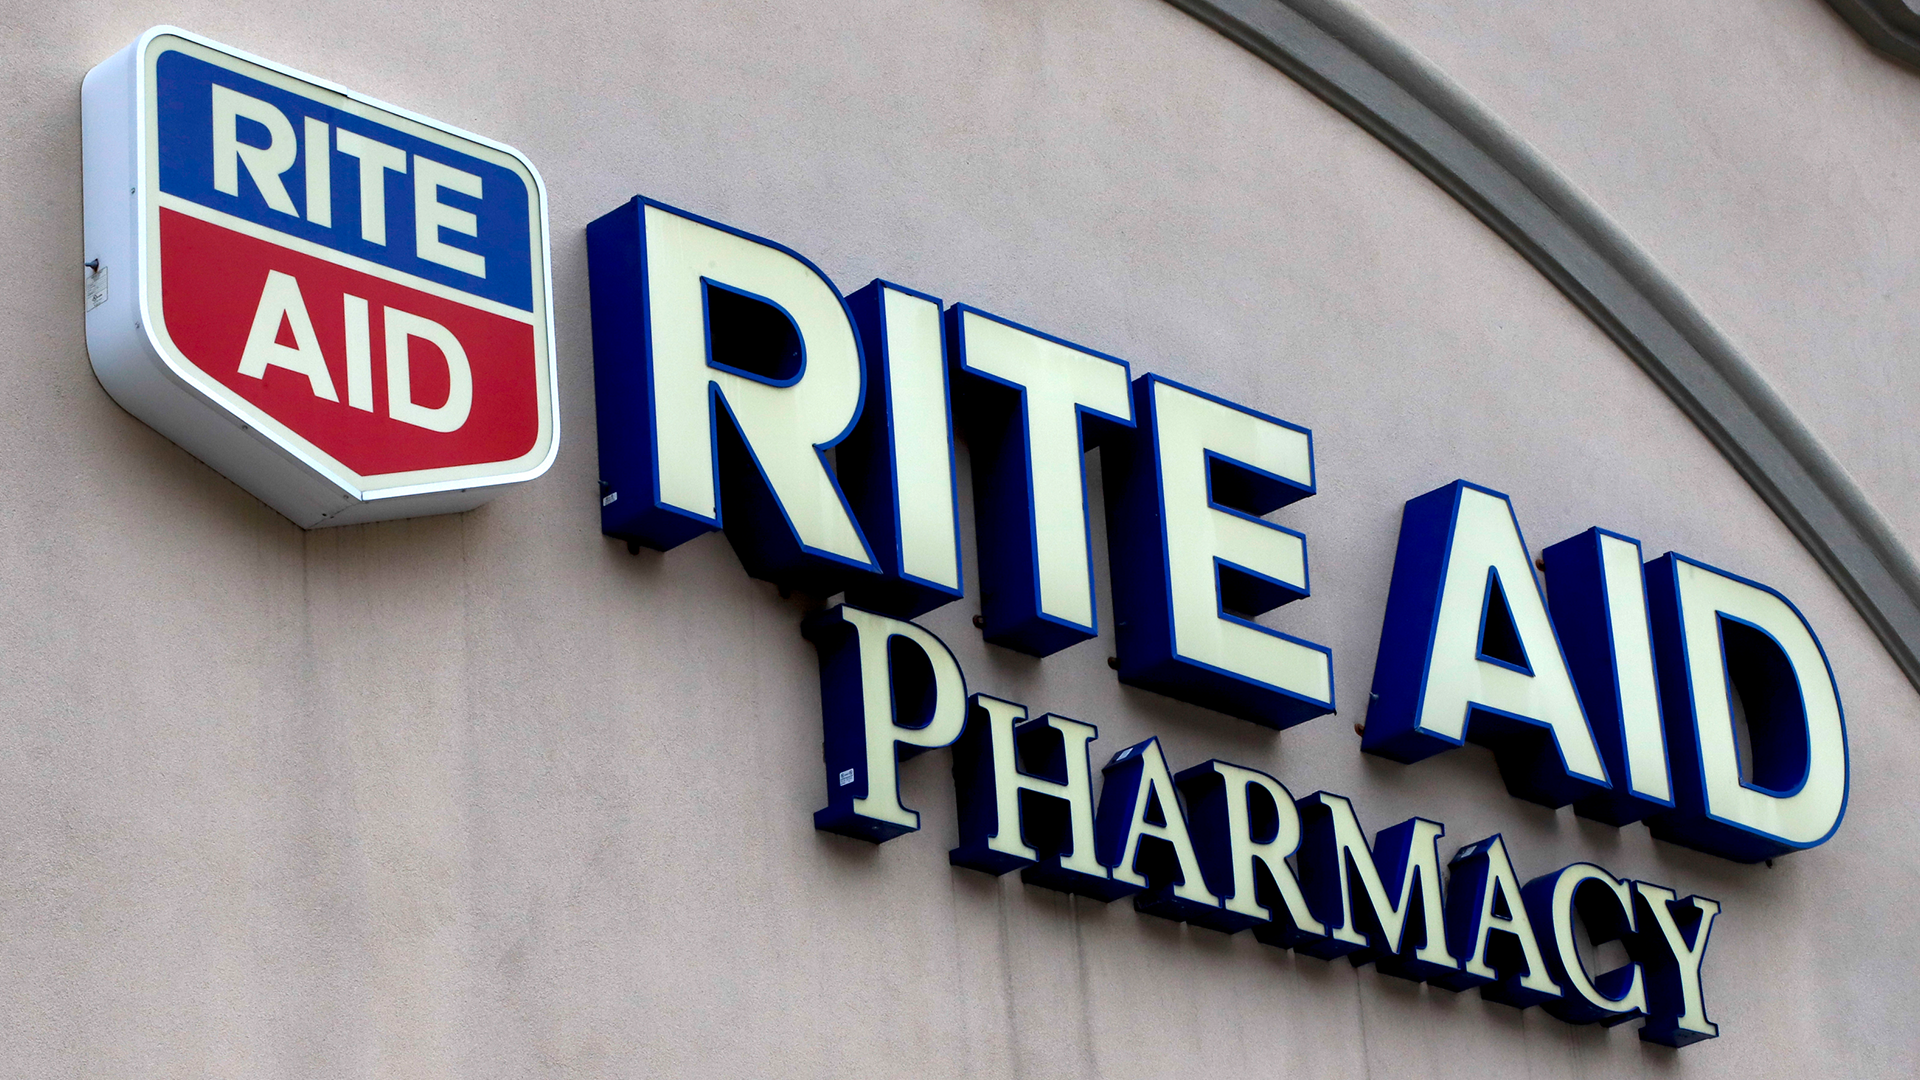 Rite Aid files for Chapter 11 bankruptcy protection amid opioid suits - The  Washington Post